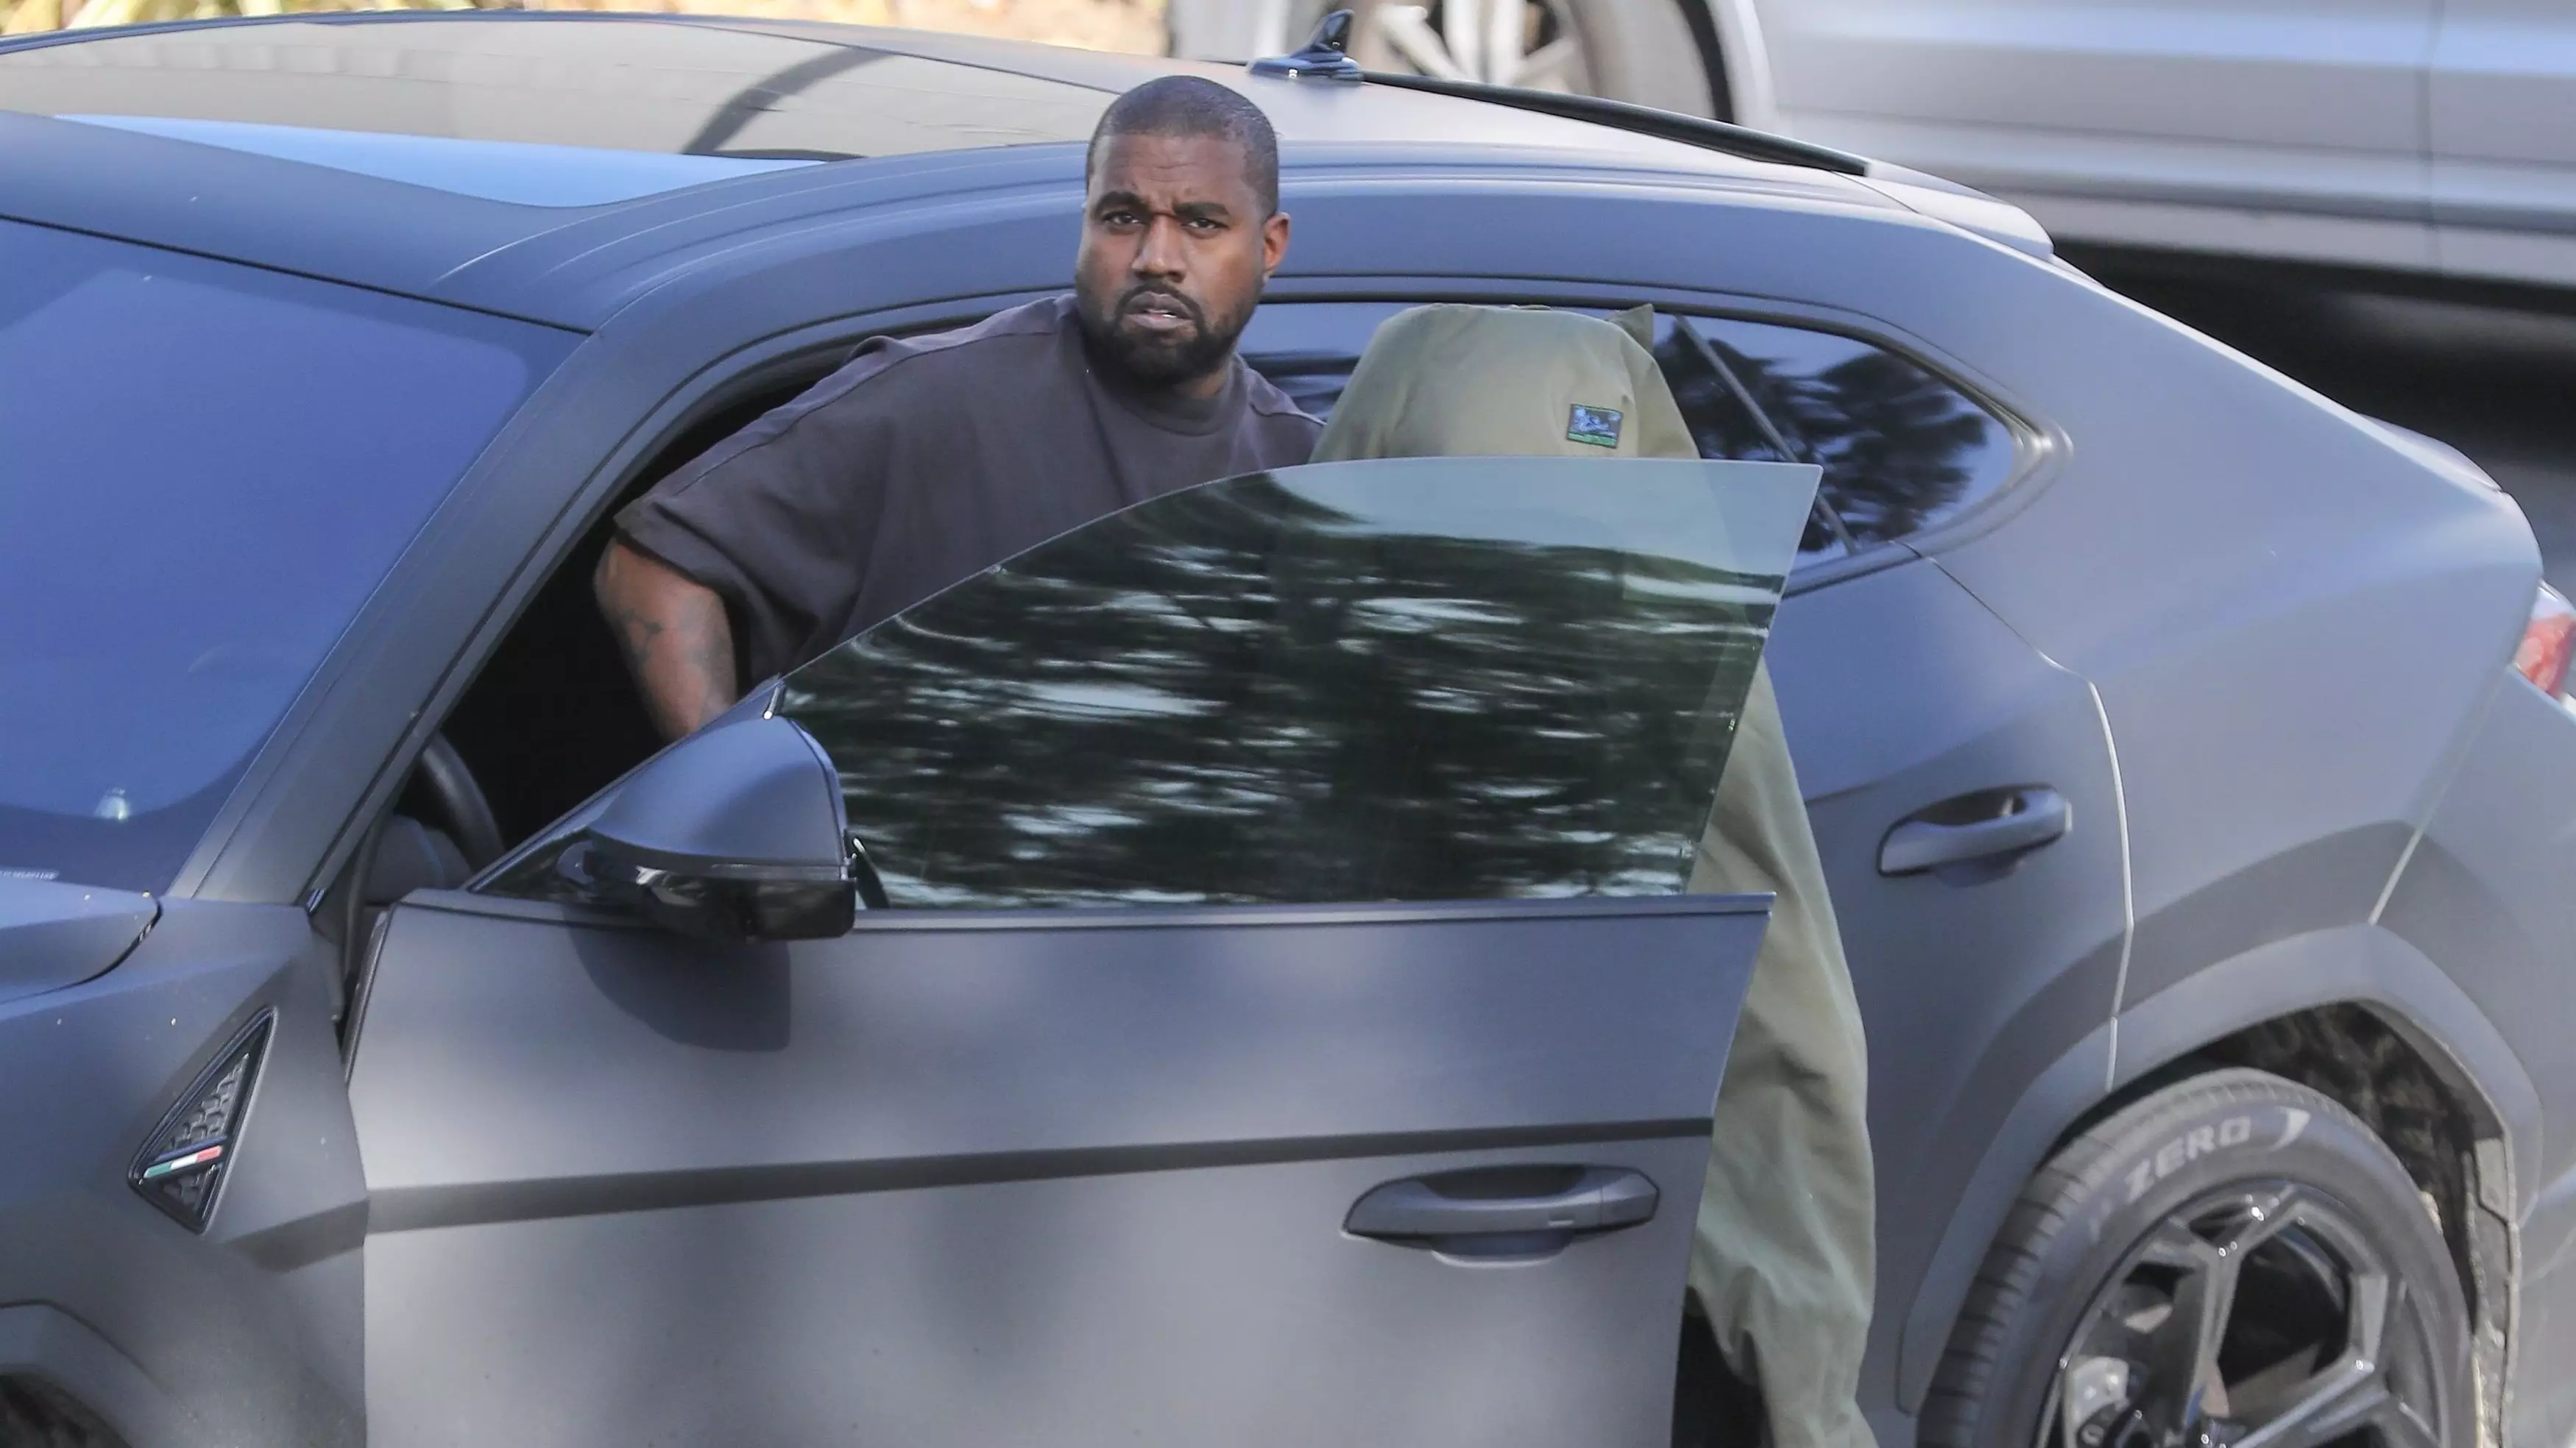 Photos Show Kanye West Helping Out Homeless Veteran On Side Of Road